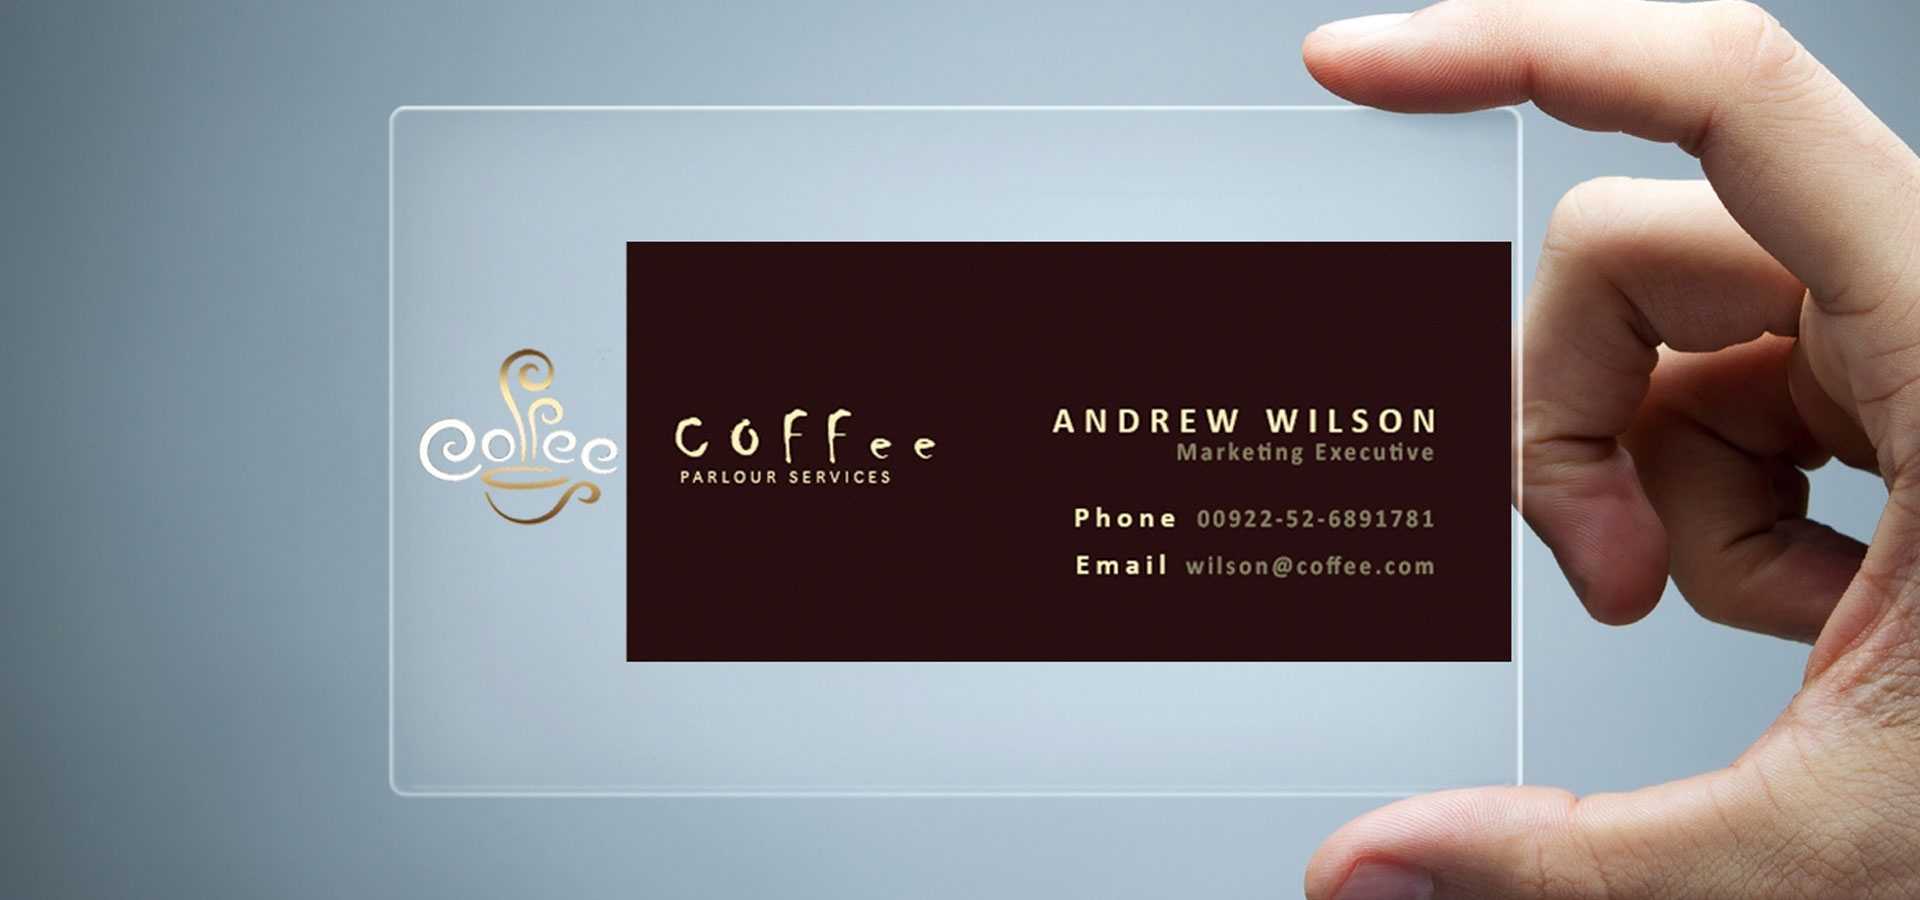 26+ Transparent Business Card Templates - Illustrator, Ms Throughout Business Cards For Teachers Templates Free